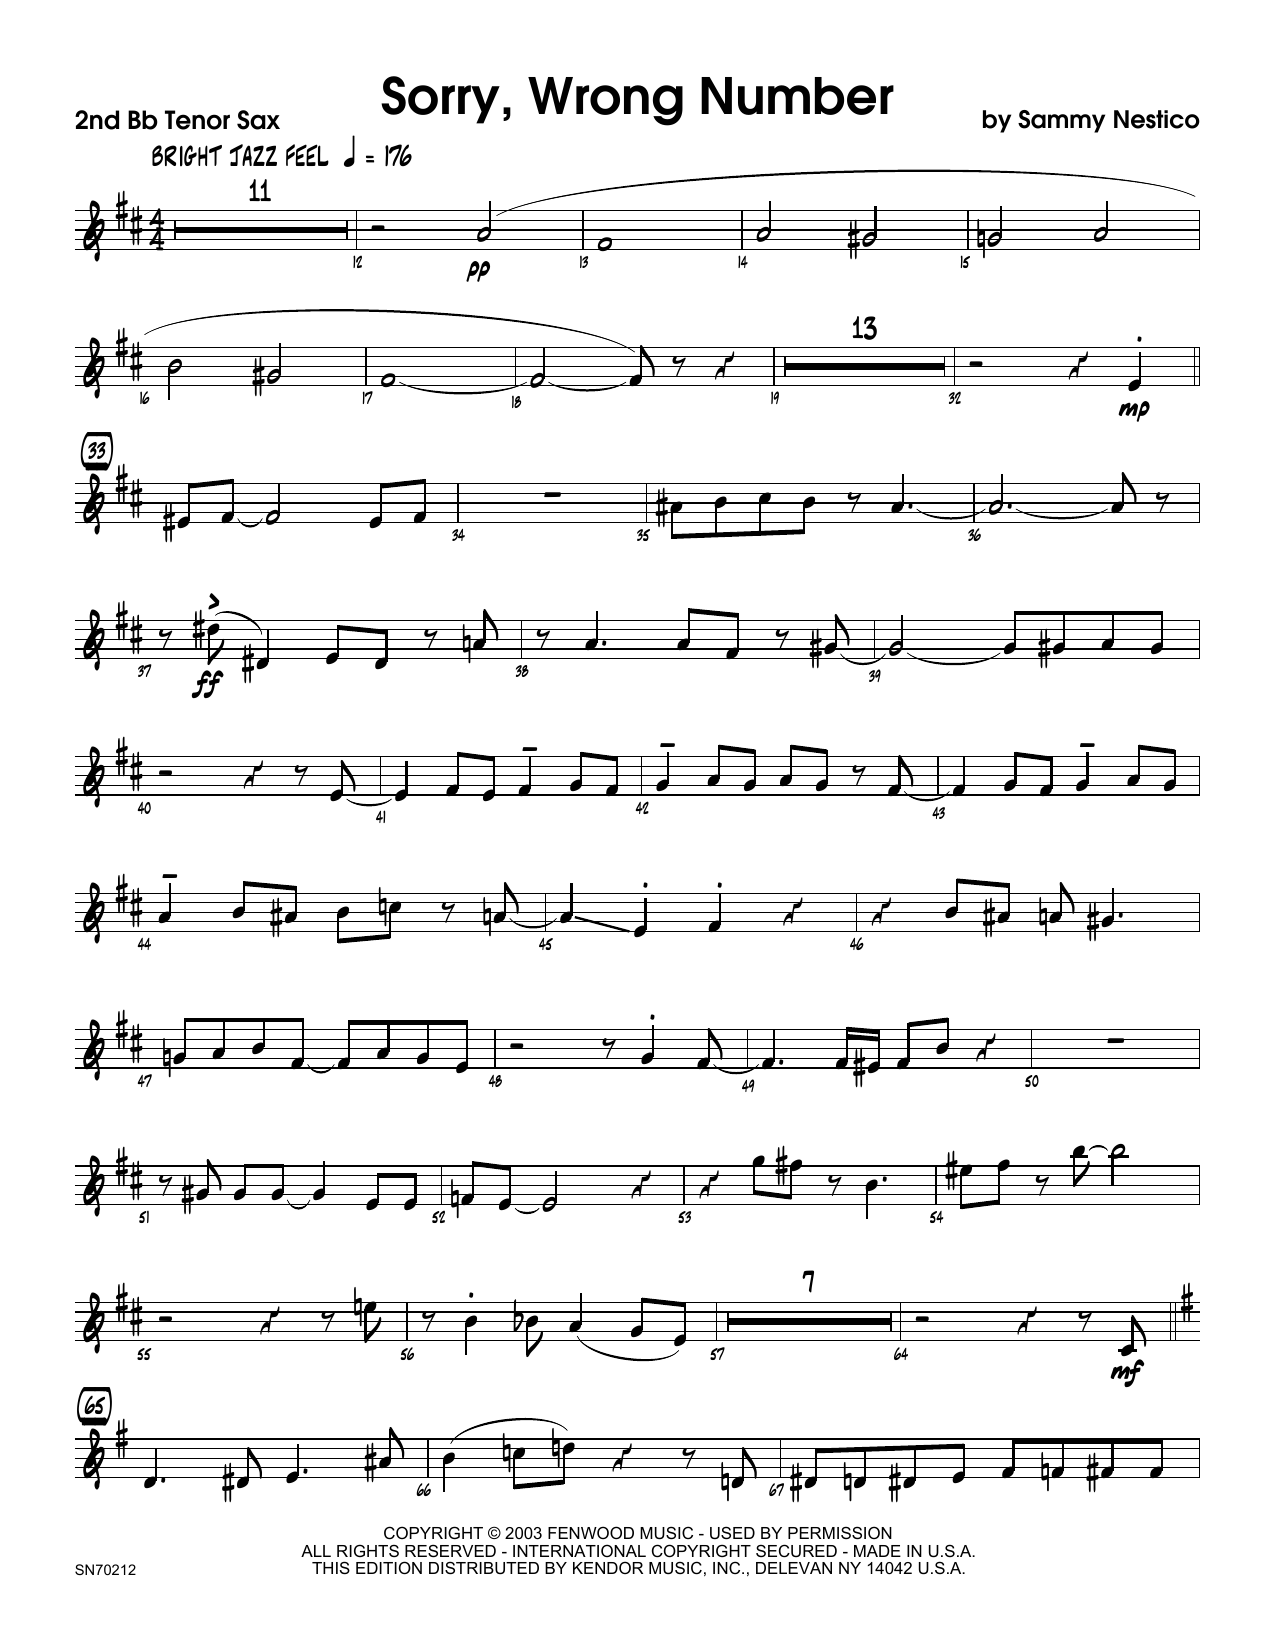 Download Sammy Nestico Sorry, Wrong Number - 2nd Bb Tenor Saxo Sheet Music